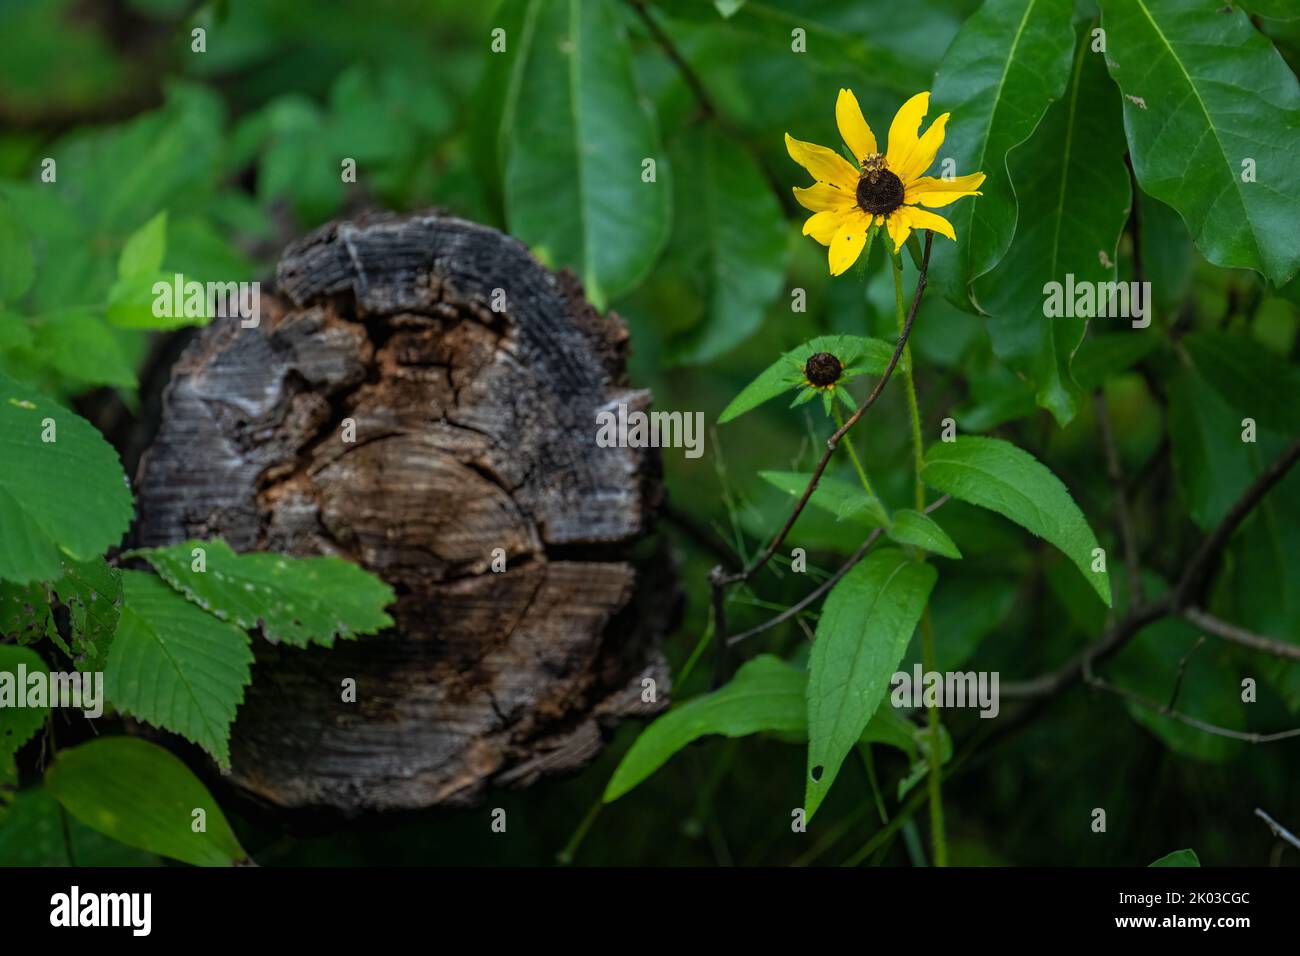 A closeup shot of a black-eyed Susan flower growing next to an old tree stump in the garden Stock Photo